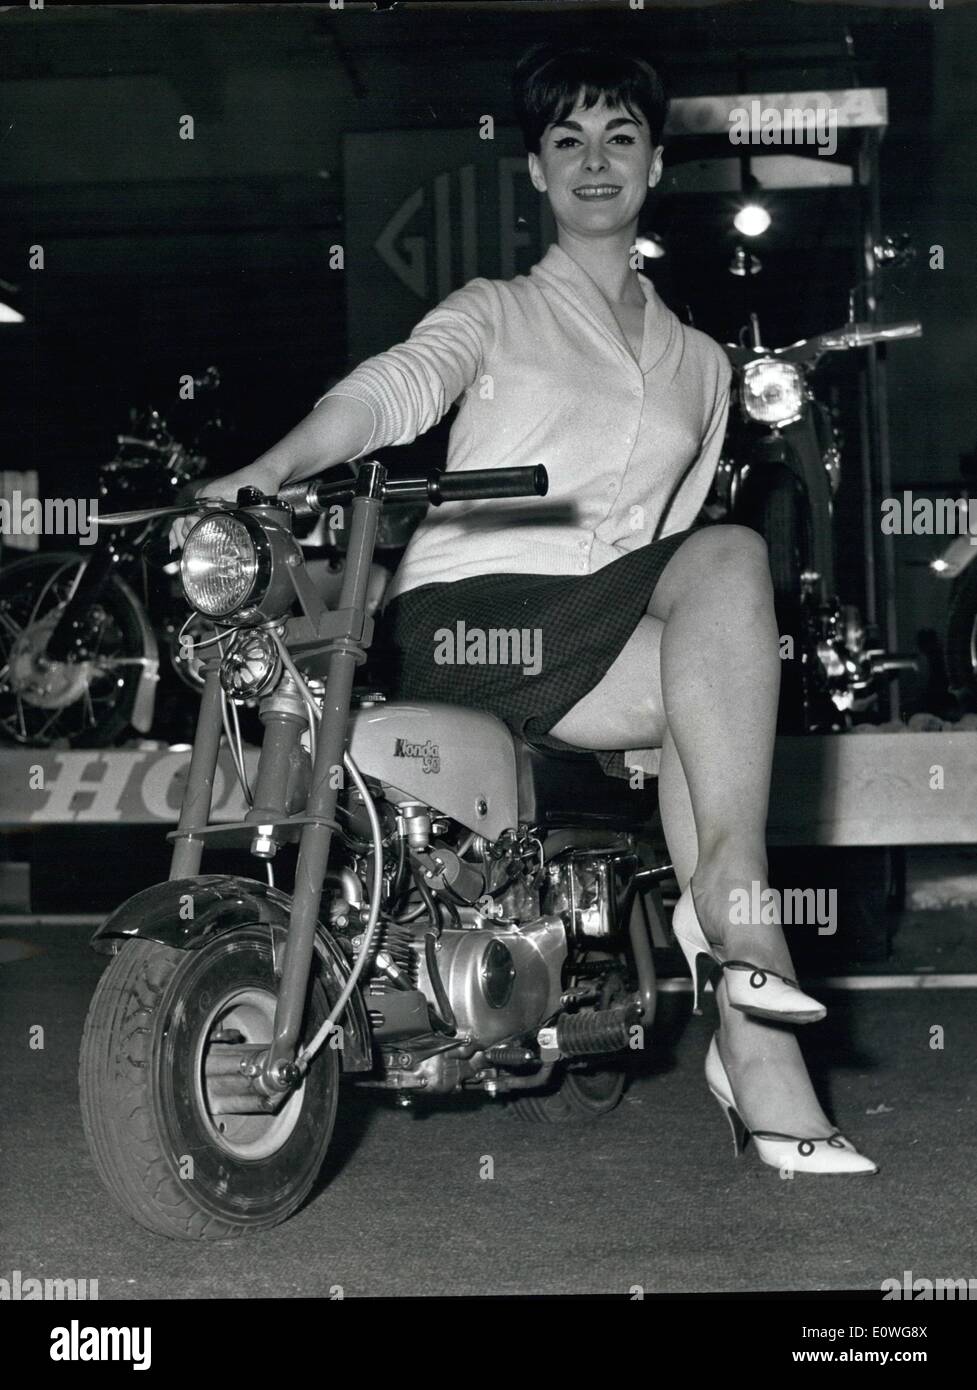 Sep. 09, 1962 - Press View - Motor Show - At Earls Court..Dawn Tries Out The Honda ''Monkey''..A press view was held today at Earls Court of the Cycle and Motor Cycle Show- Which Opens There Tomorrow.. Keystone Photo Shows- Model Dawn Maxey - On the New Japanese Honda ''Monkey'' 50 C.C. - Machine which does 45 m.p.h. - at 160 m.p.g. a Real Miniature but practical motor cycle...It is now yet priced. Stock Photo